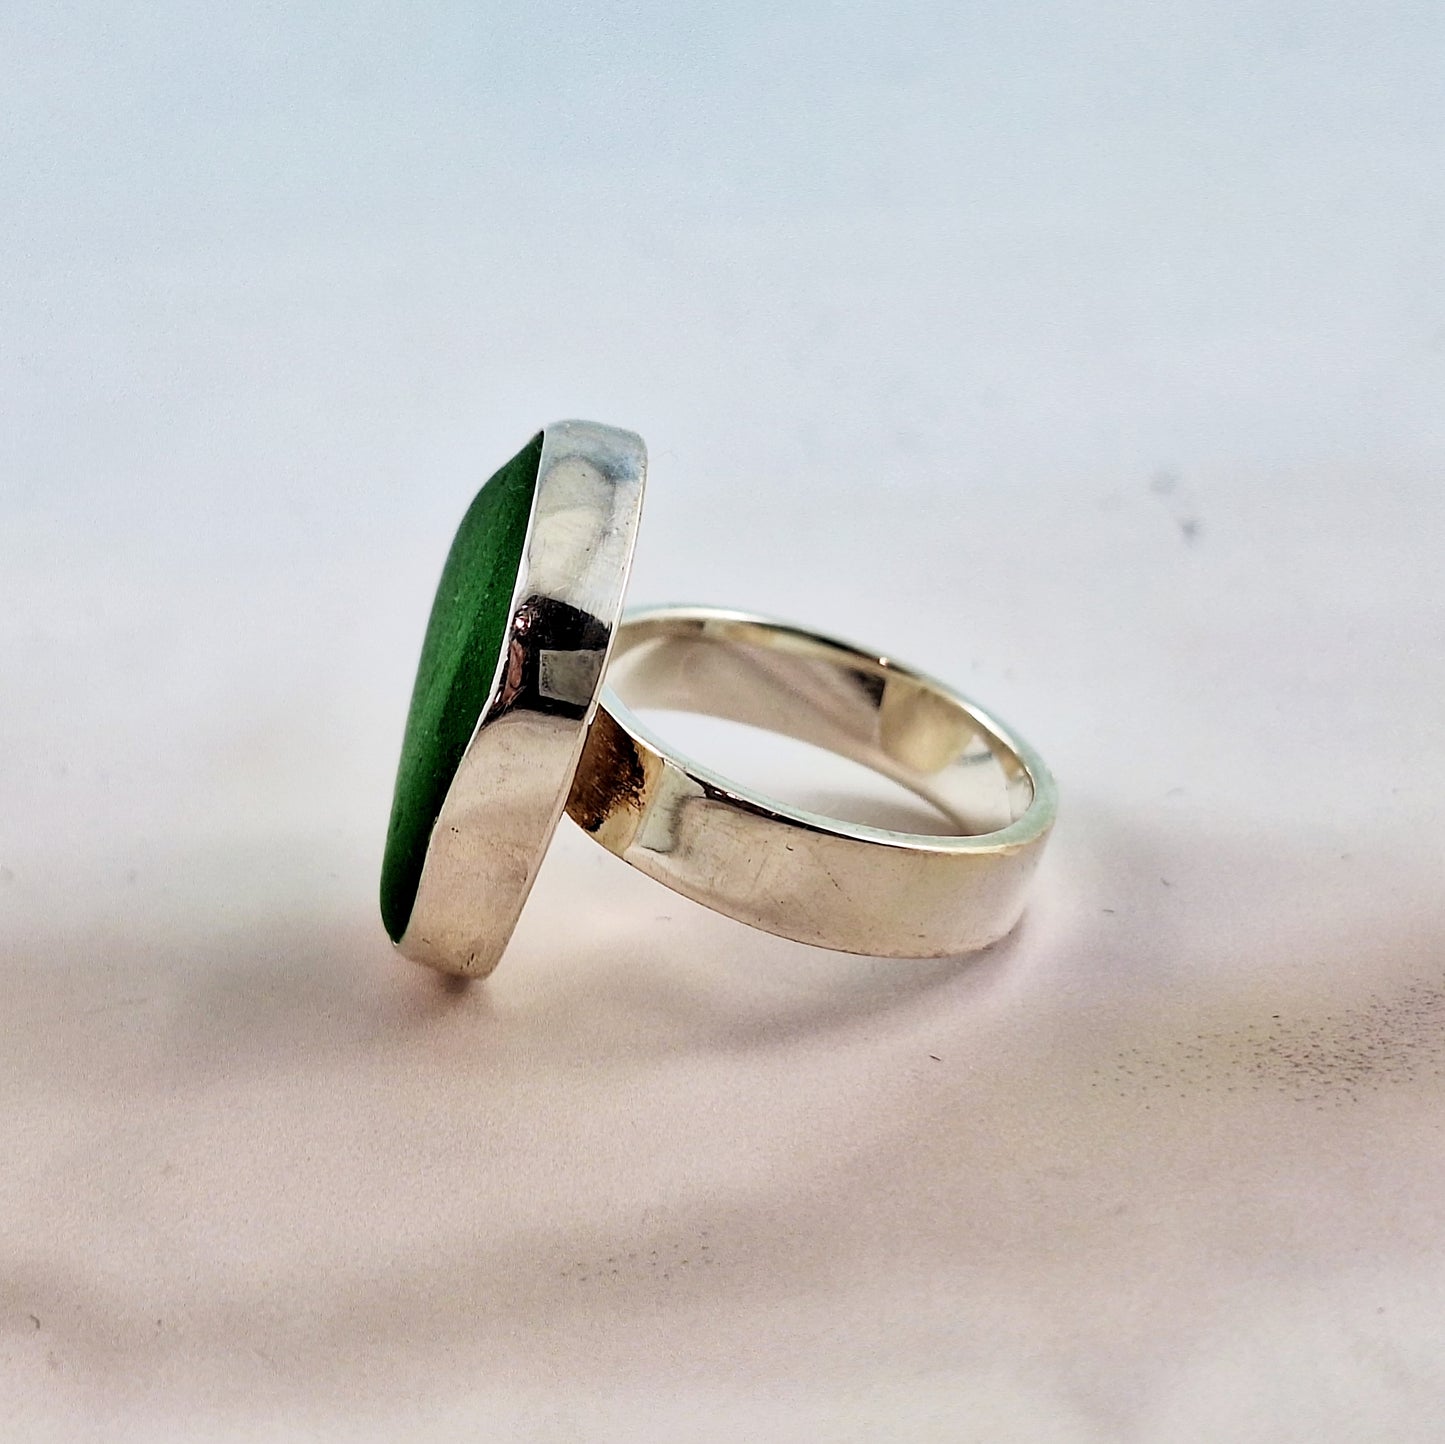 Ring size 7: Round Sea Grass Green